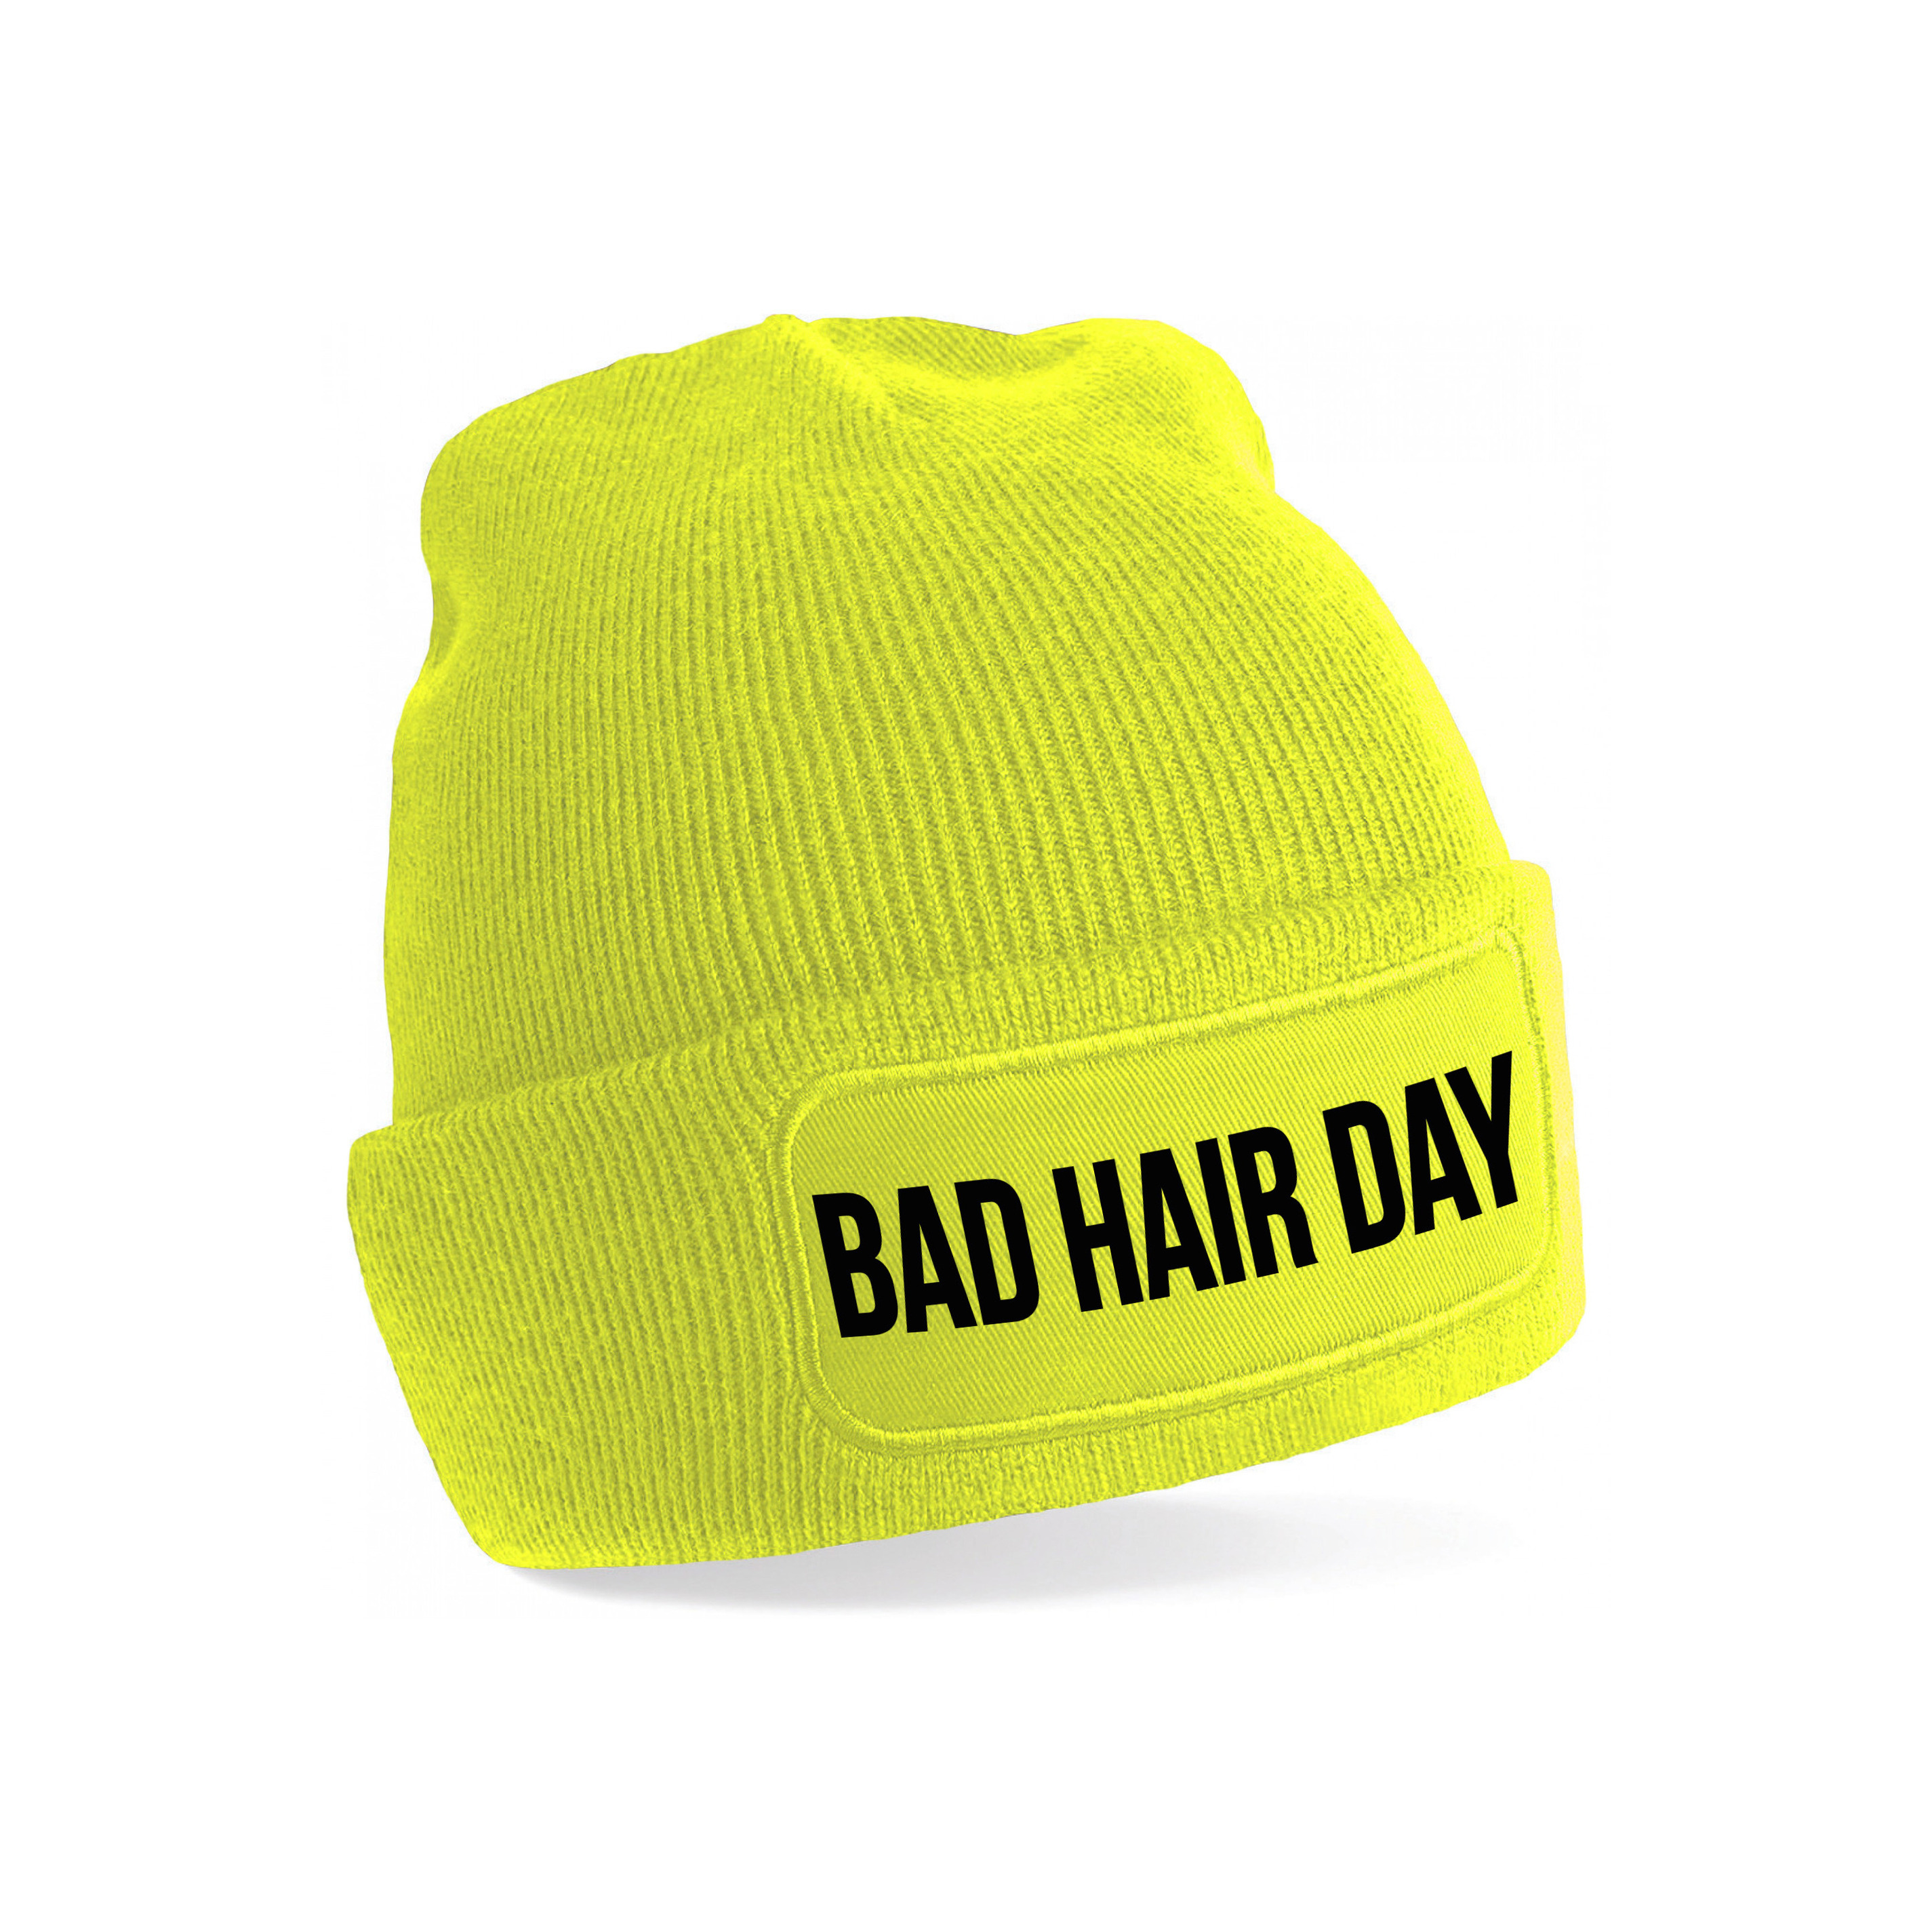 Bad hair day muts unisex one size Geel